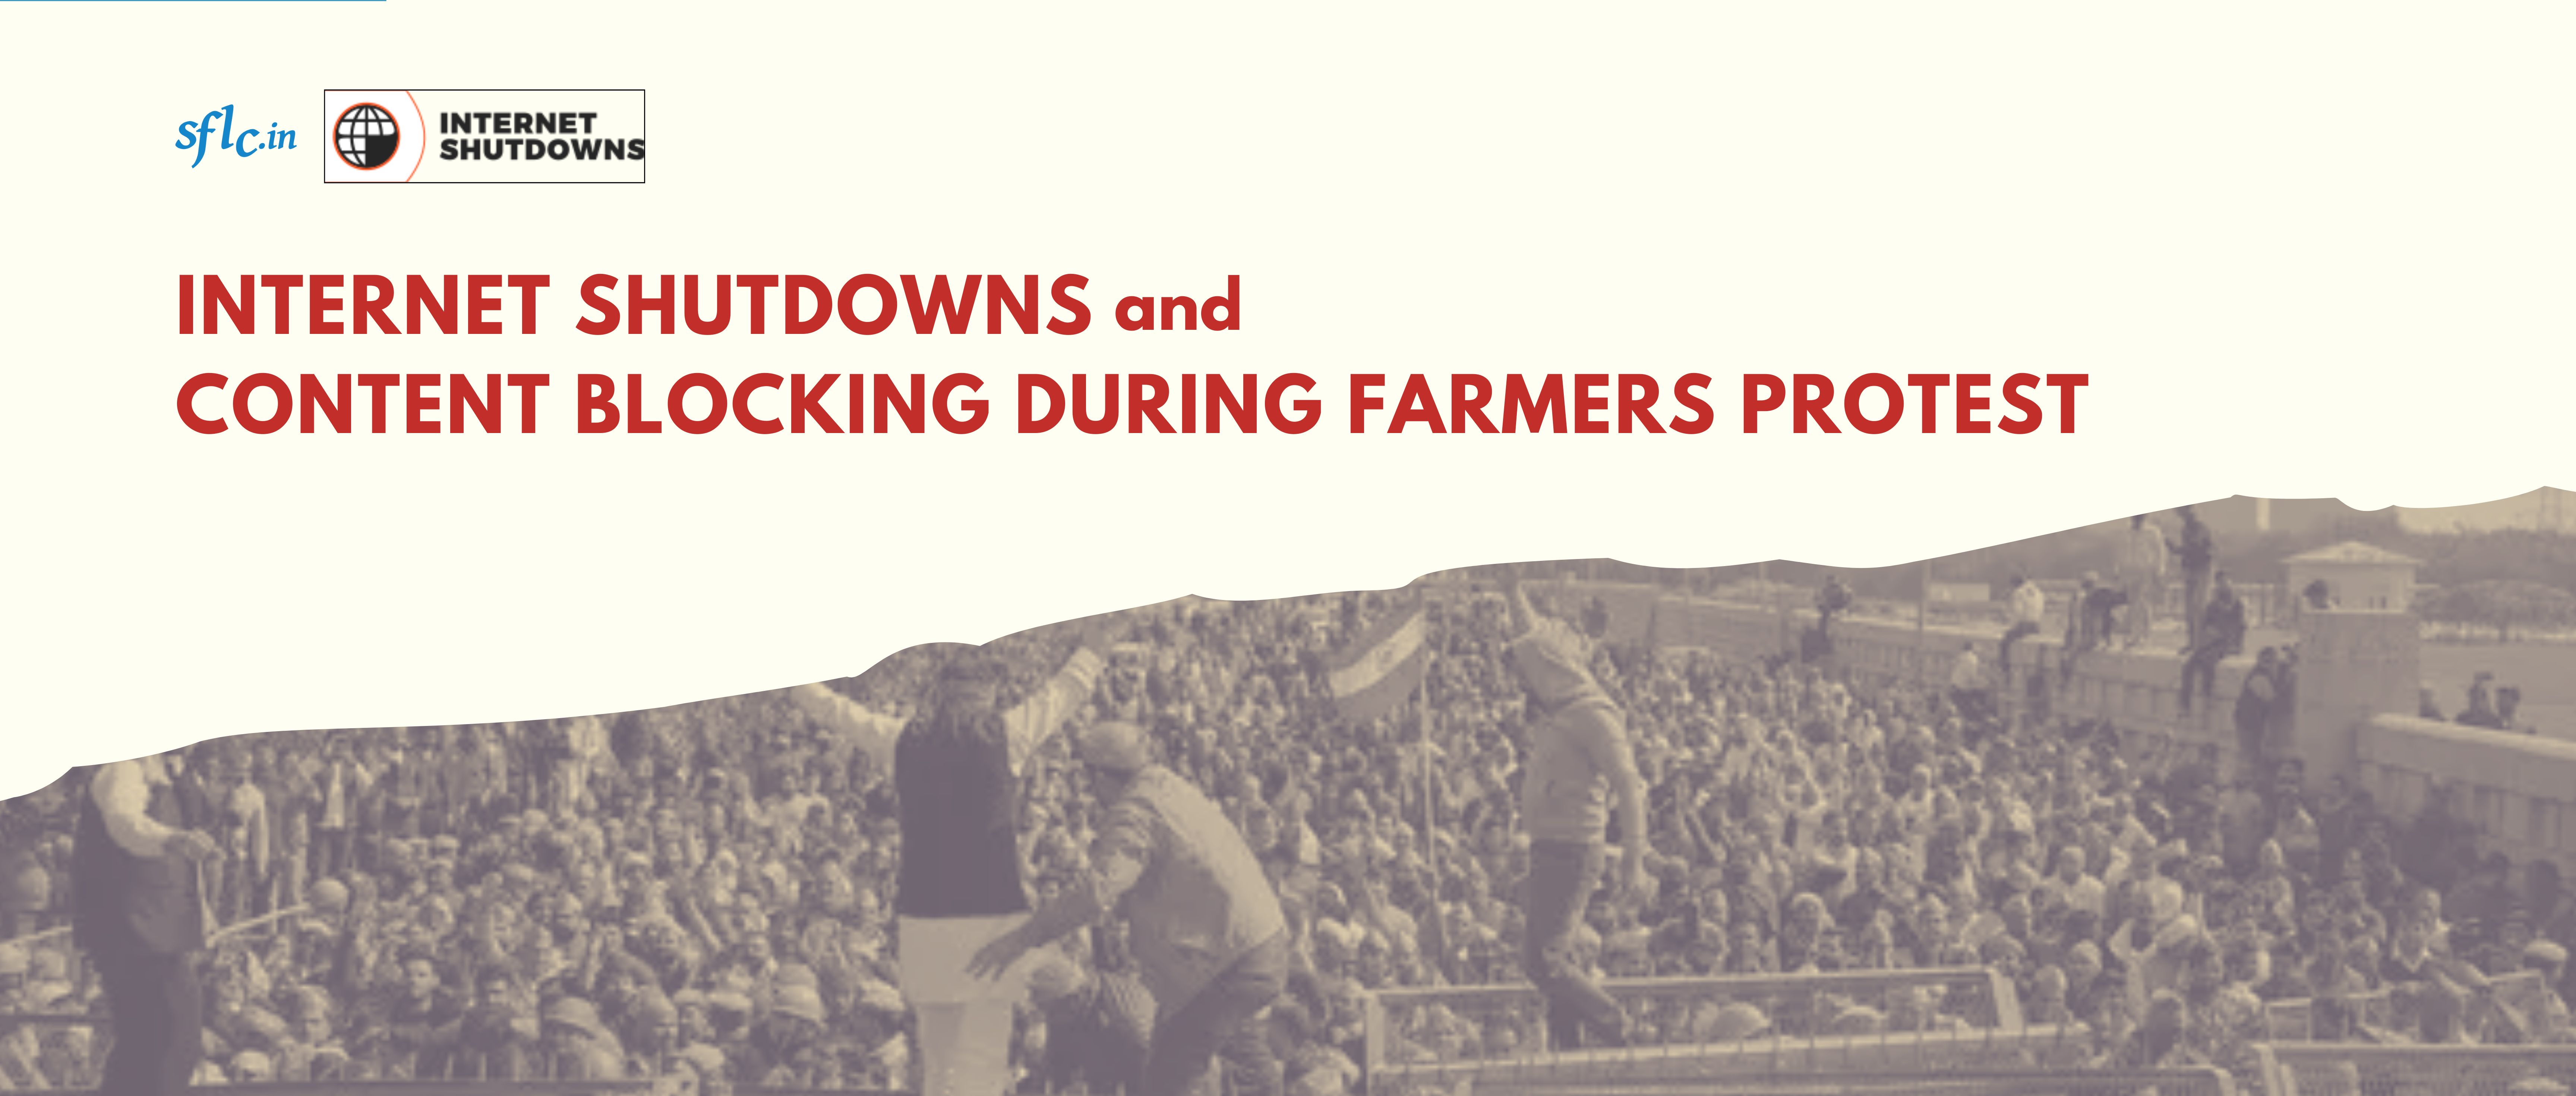 A runthrough on the ongoing Internet shutdowns and content blocking during the farmers’ protest